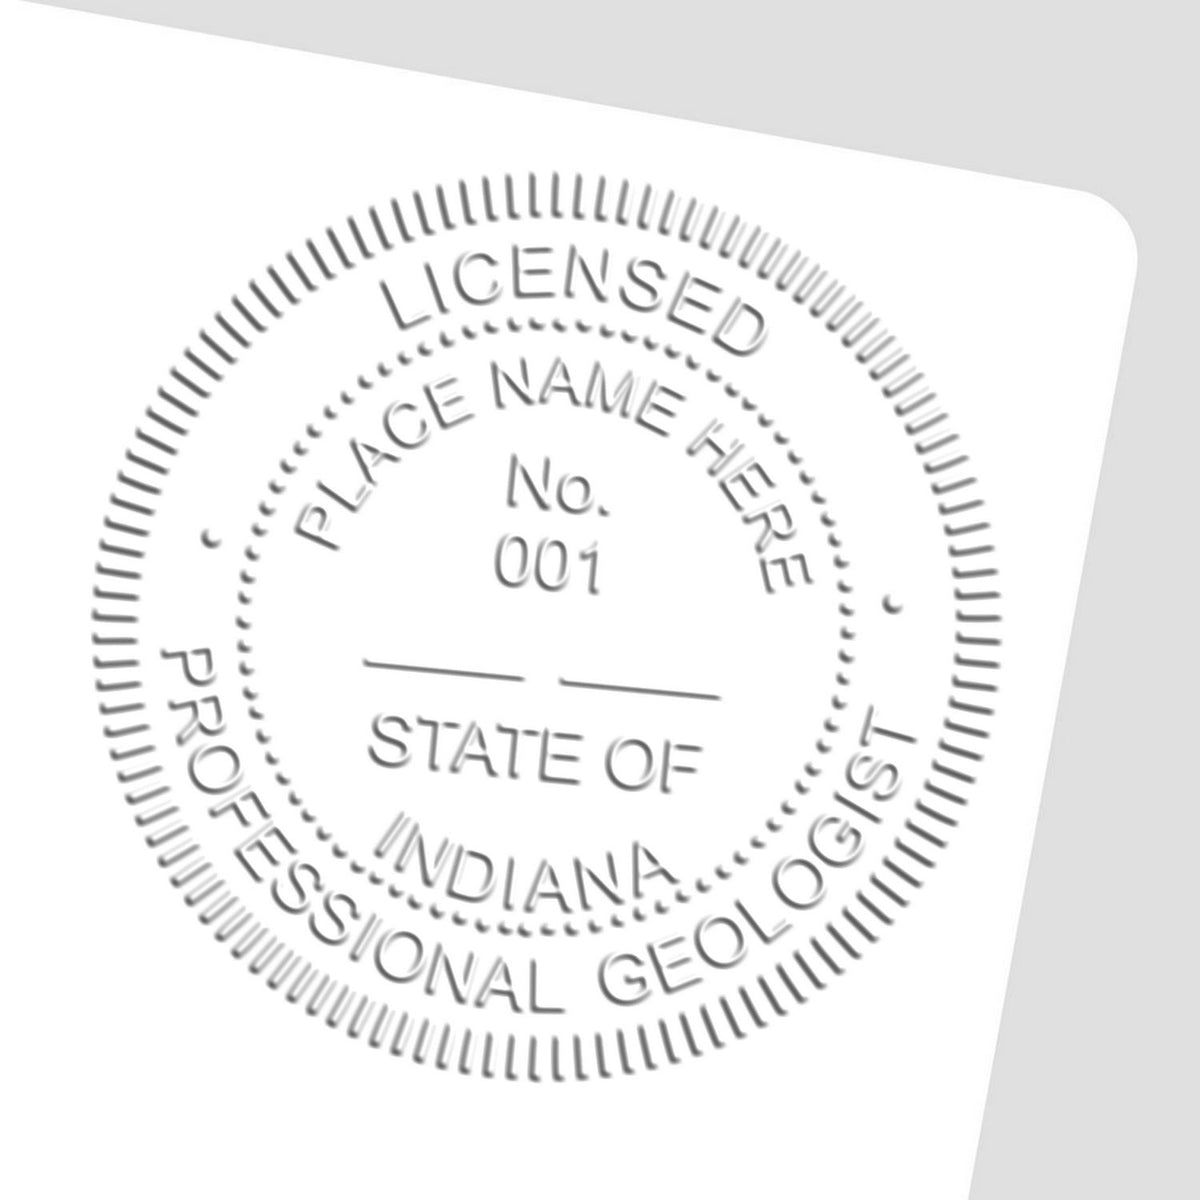 A photograph of the Gift Indiana Geologist Seal stamp impression reveals a vivid, professional image of the on paper.